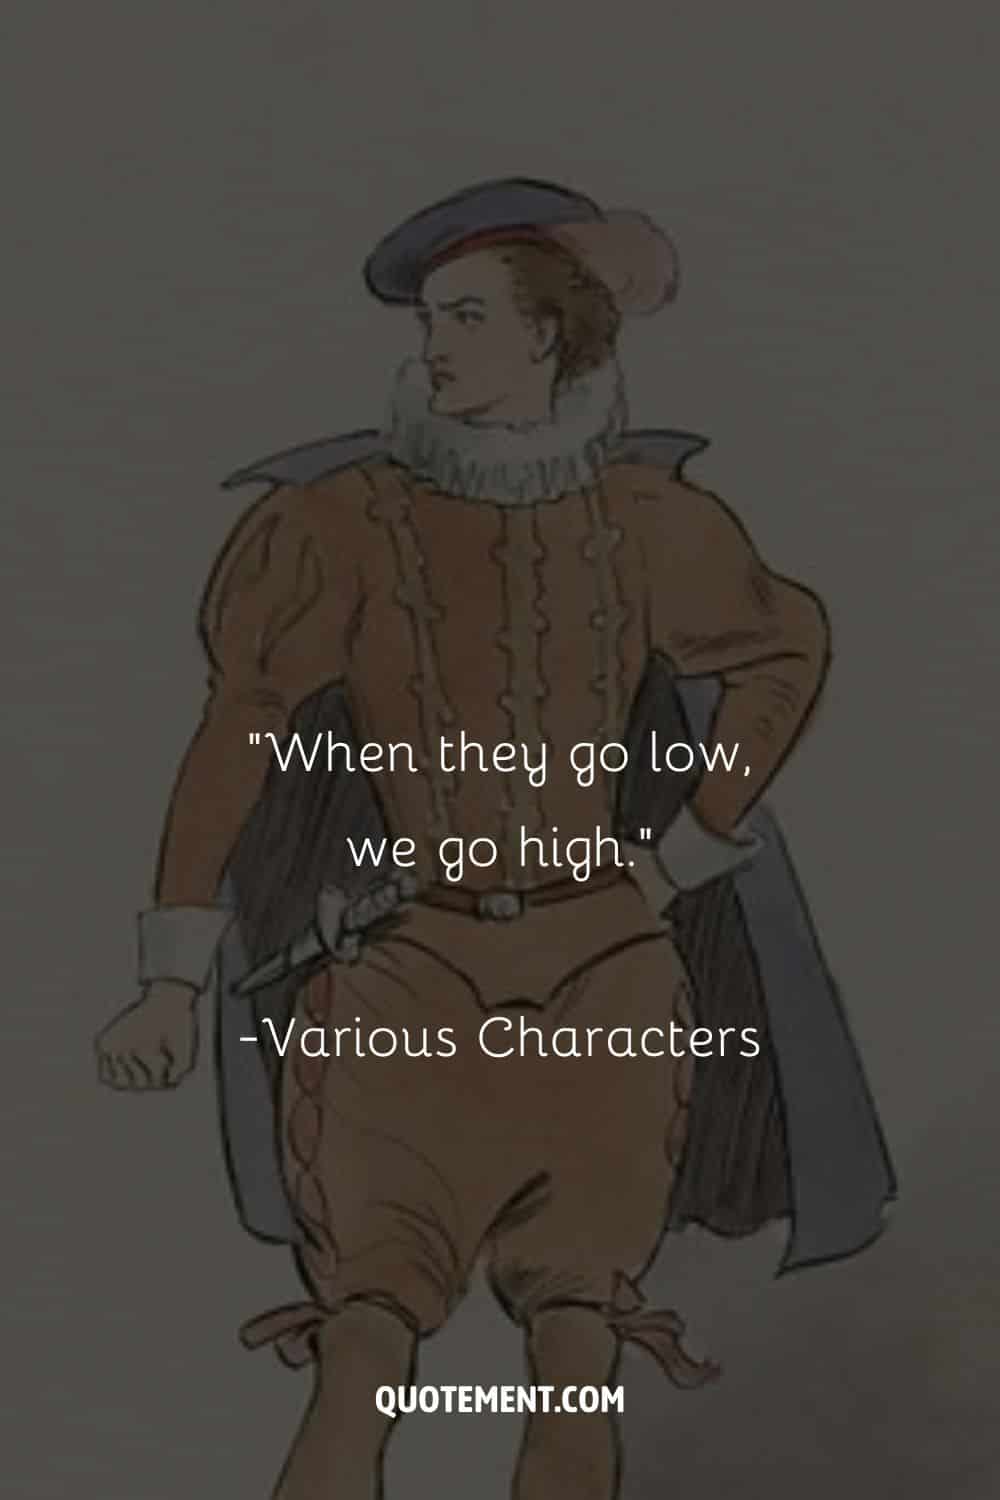 an image of a medieval man representing hamilton the musical quote
